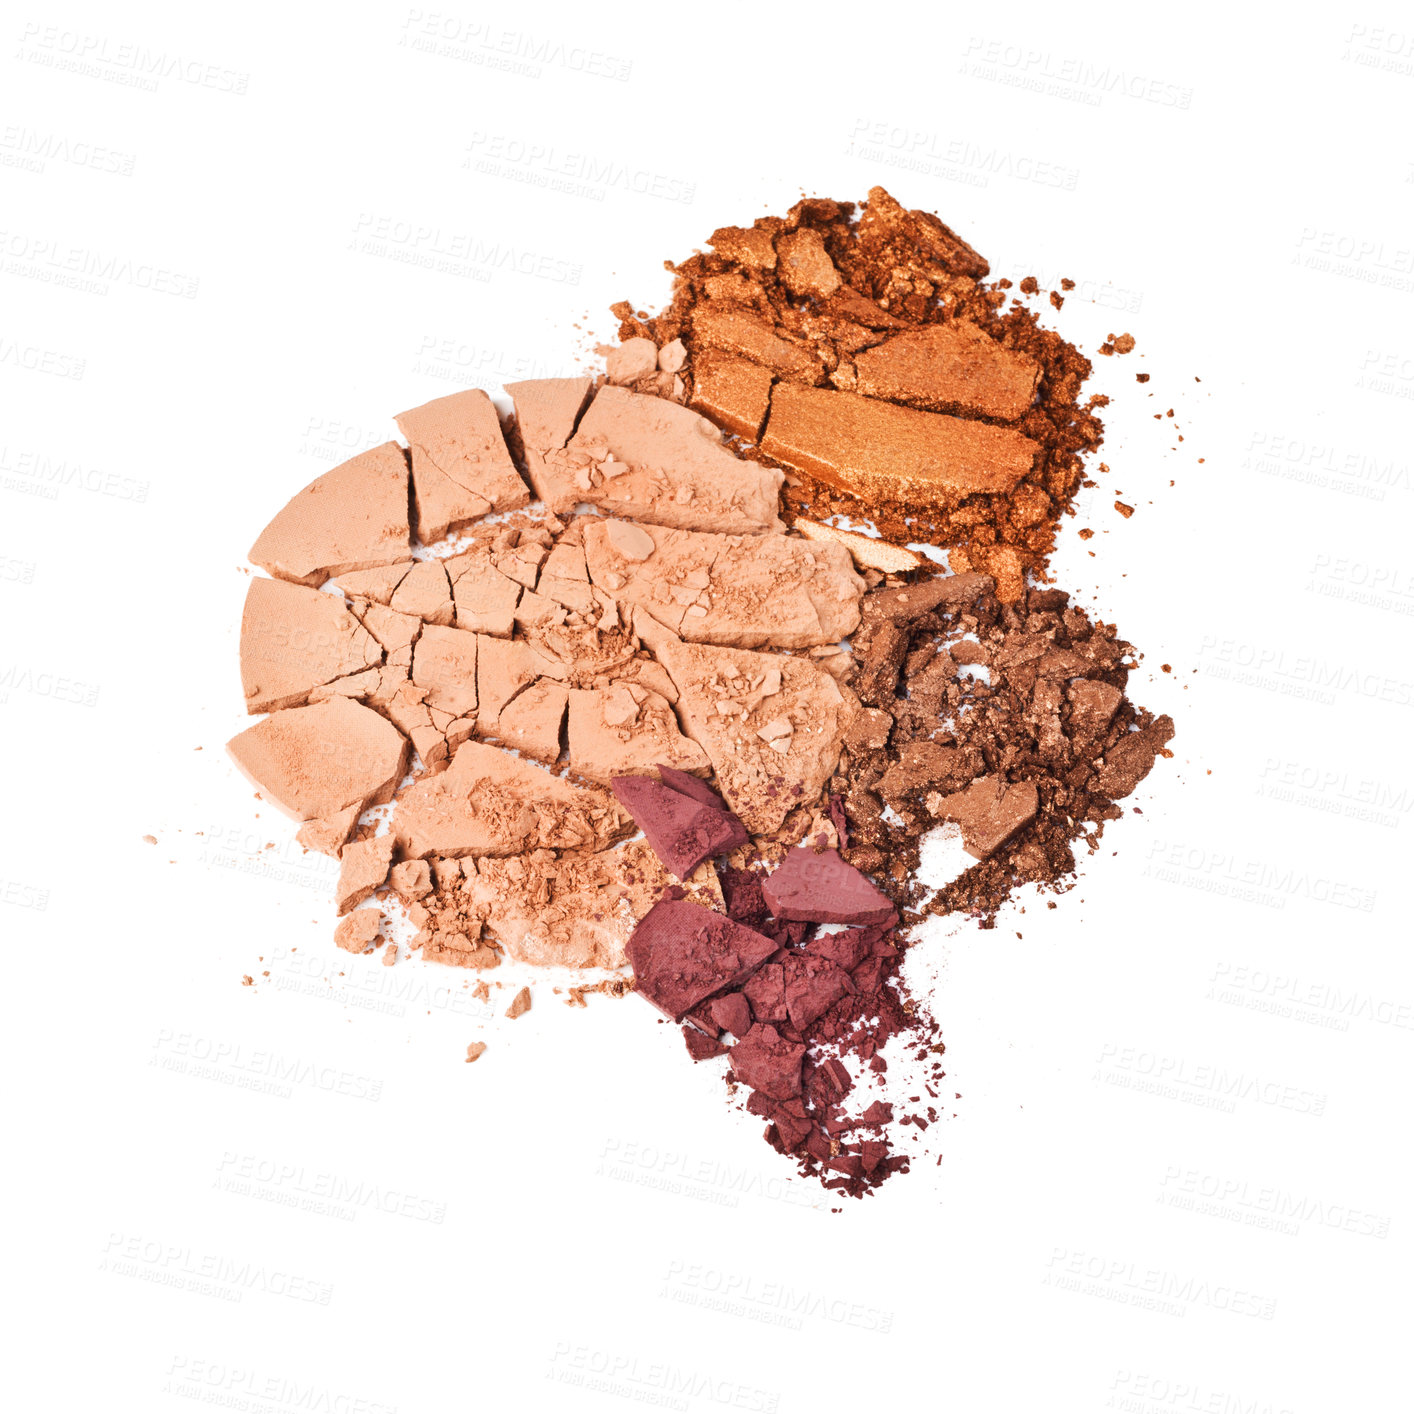 Buy stock photo Studio shot of crushed makeup against a white background